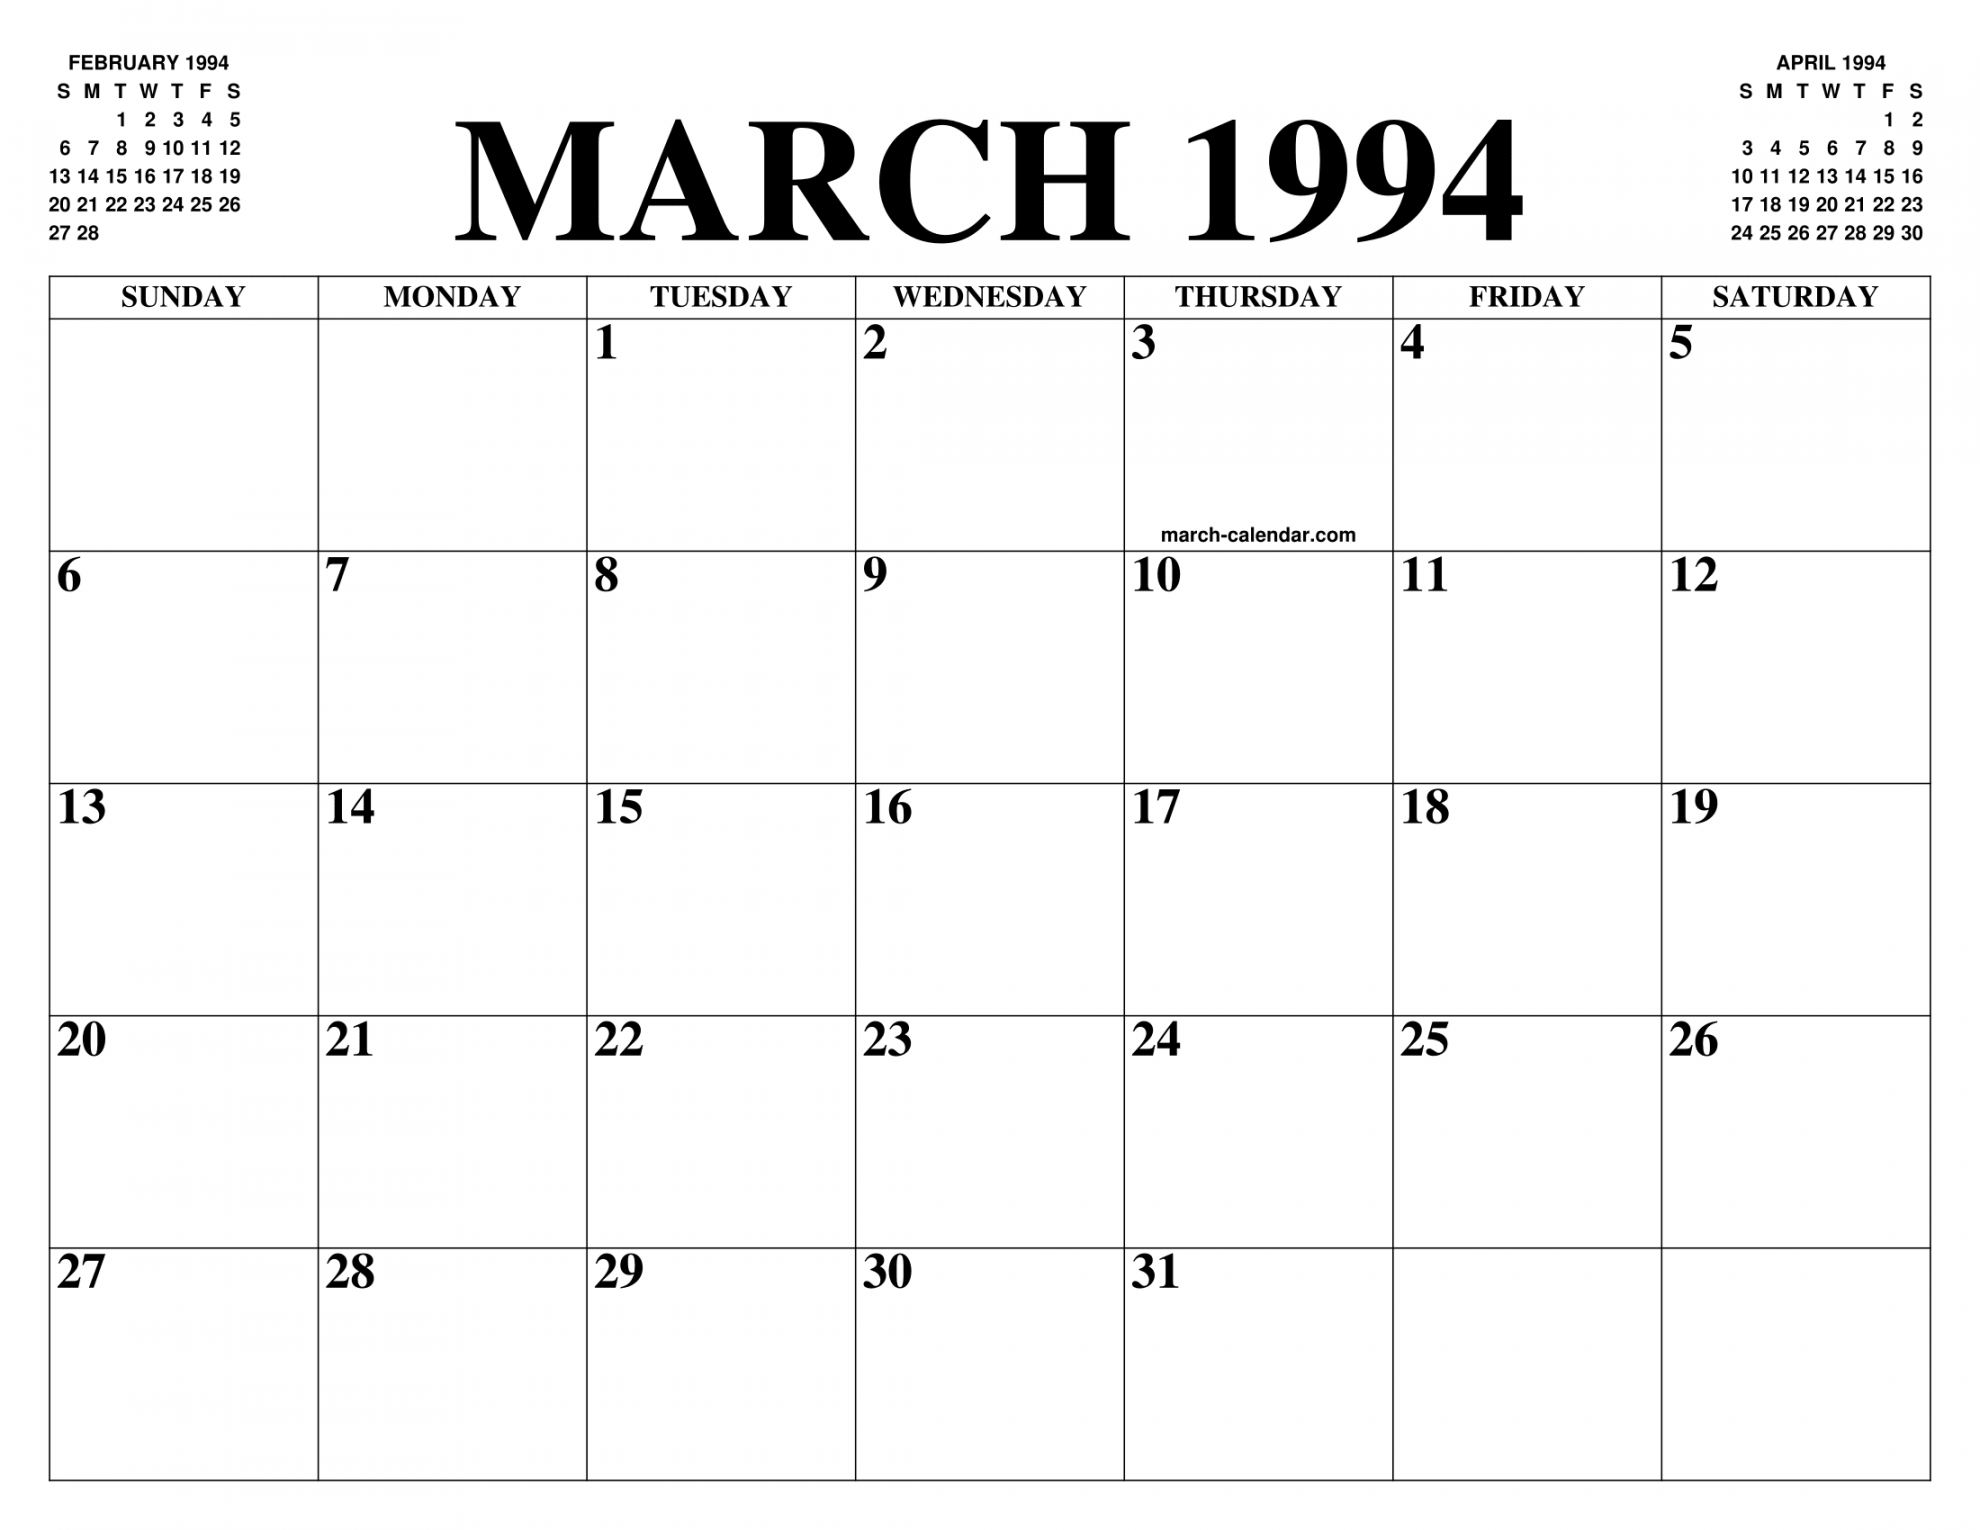 MARCH  CALENDAR OF THE MONTH: FREE PRINTABLE MARCH CALENDAR OF